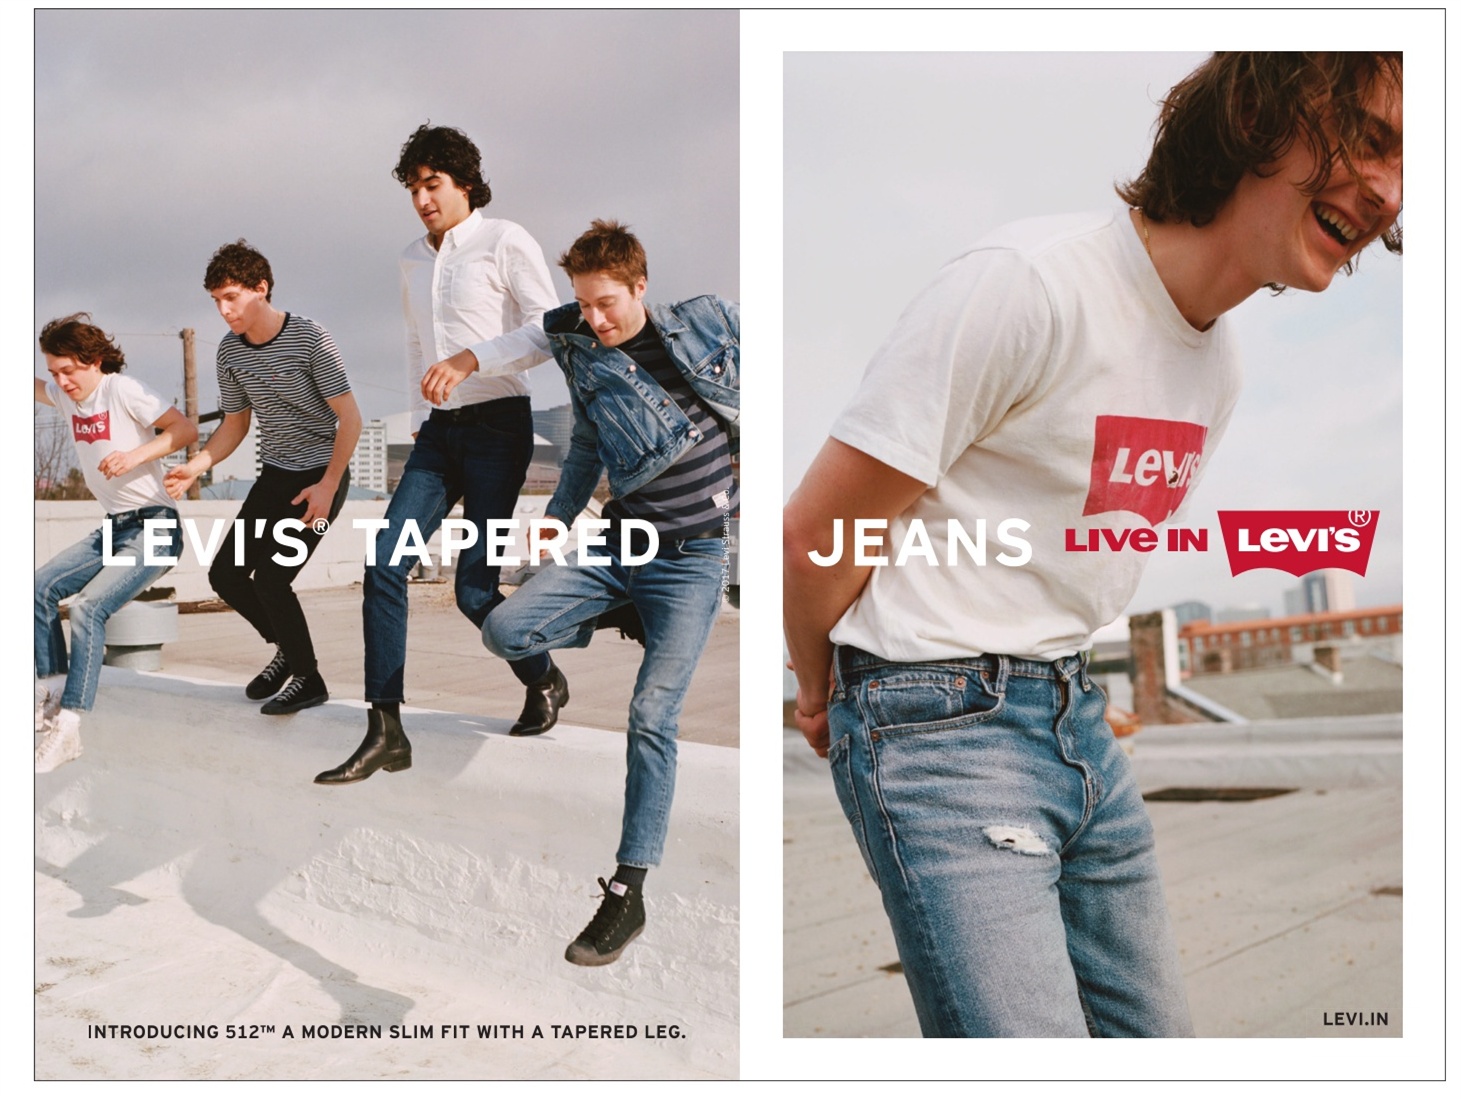 Levi's Jeans Live In Levis Tapered Ad Advert Gallery